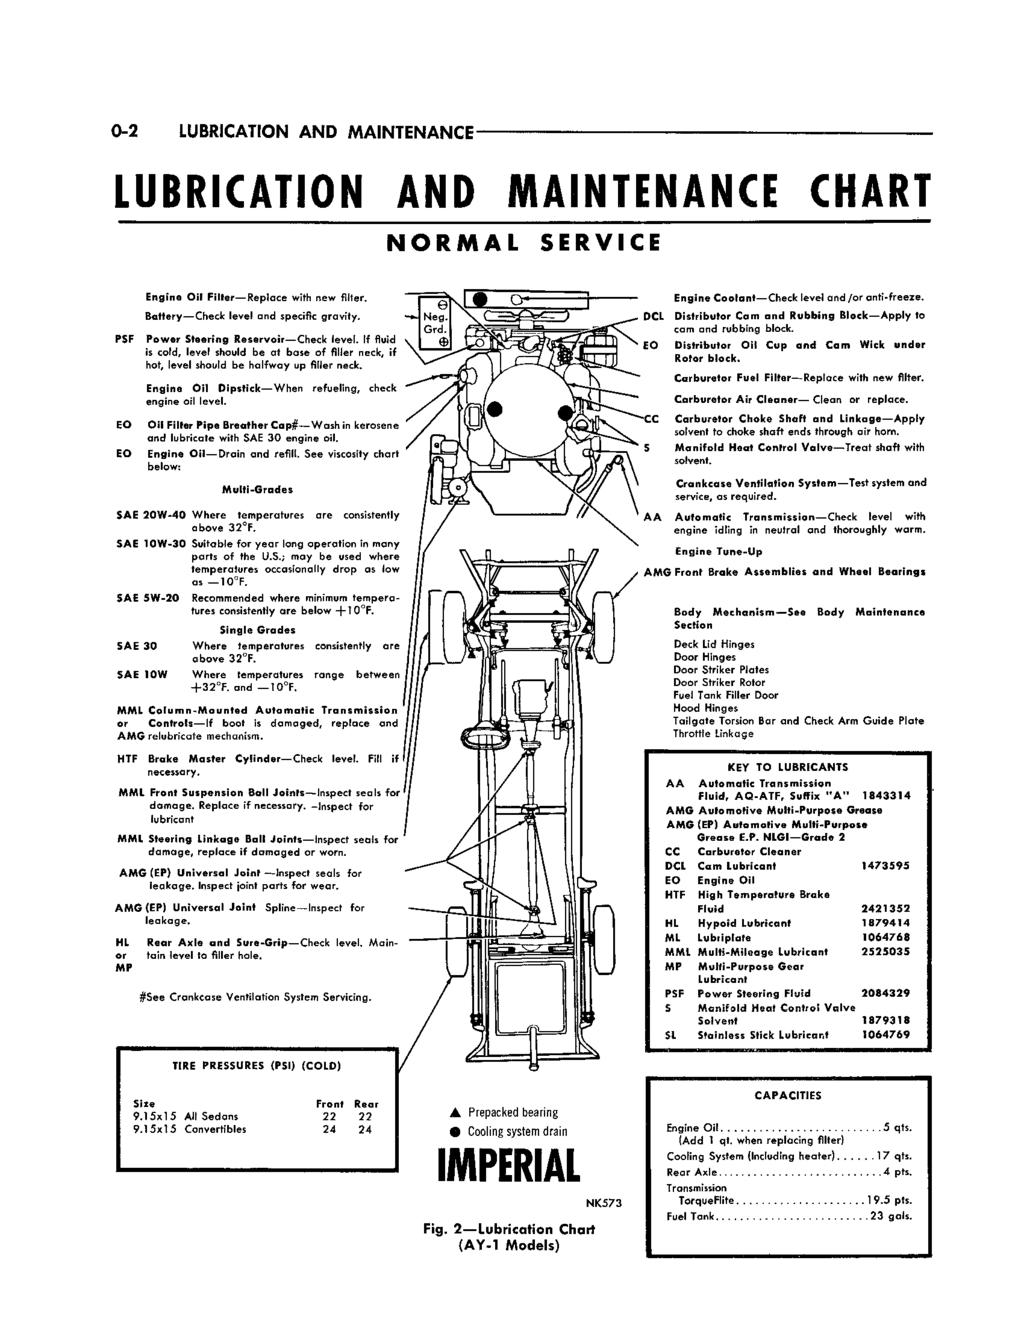 0-2 LUBRICATION AND MAINTENANCE LUBRICATION AND MAINTENANCE CHART NORMAL SERVICE Engine Oil Filler Replace with new filter. Battery Check level and specific gravity.